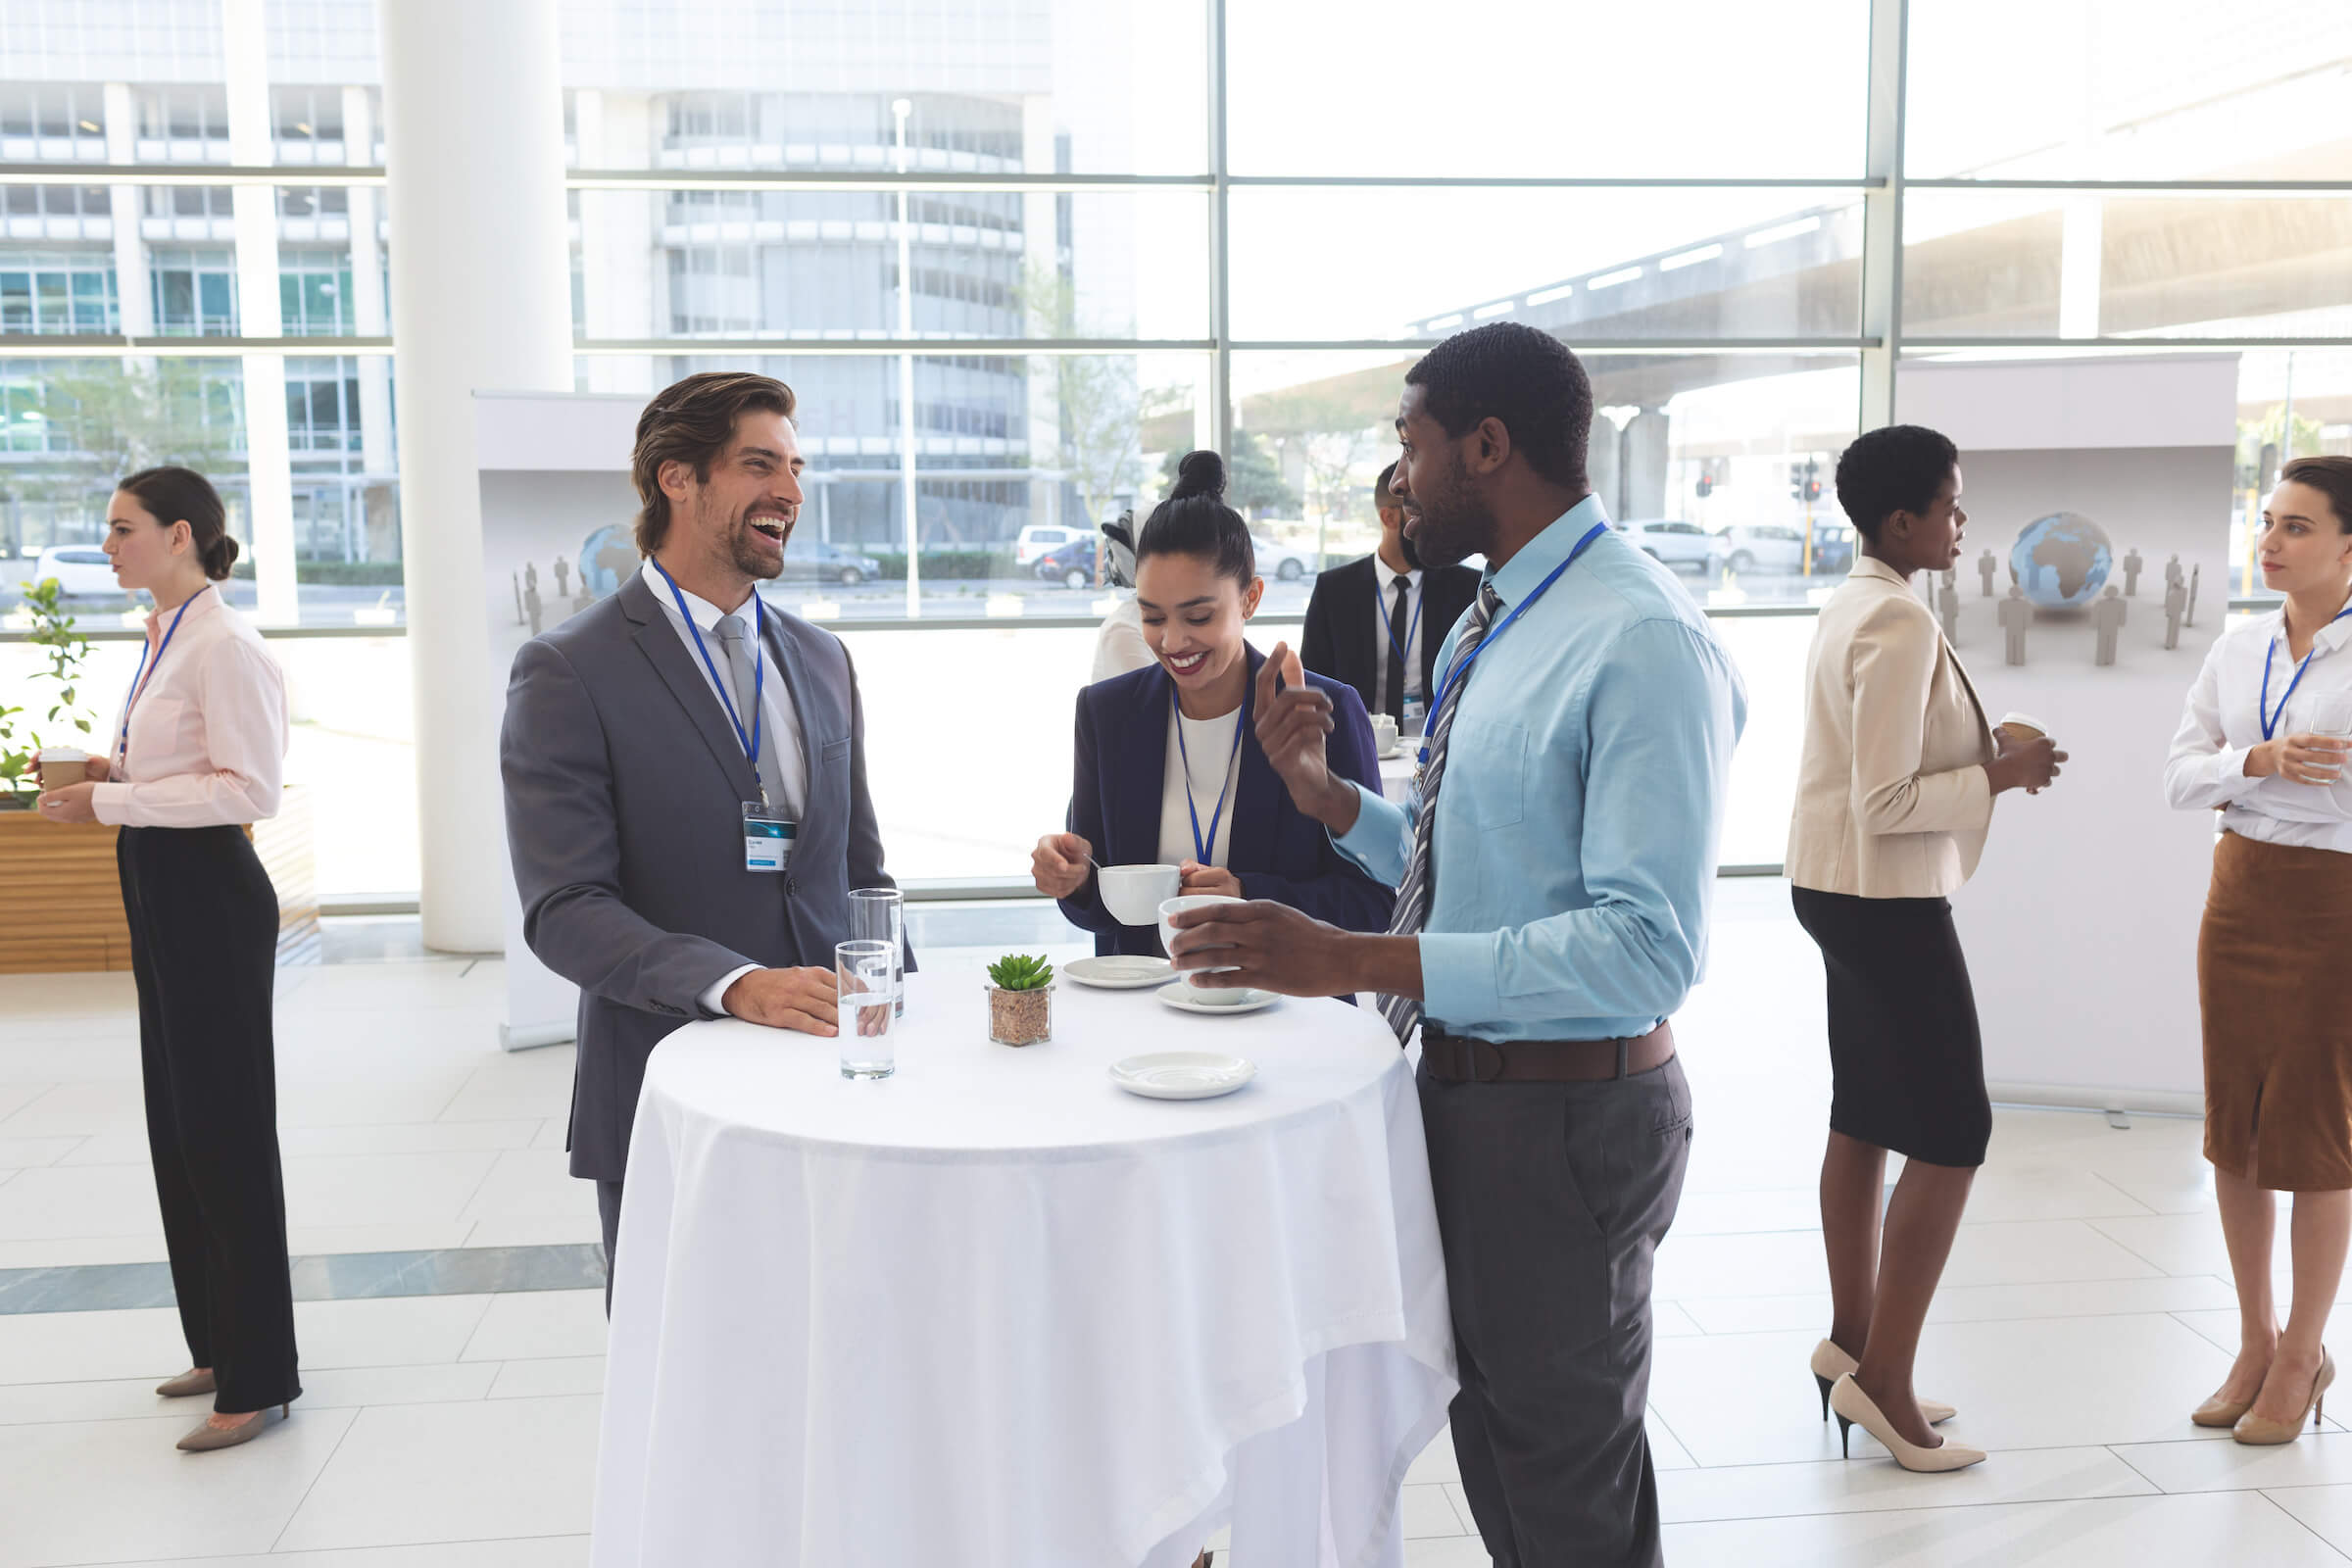  Planning a Networking Event: 7 Steps to Ensure Success